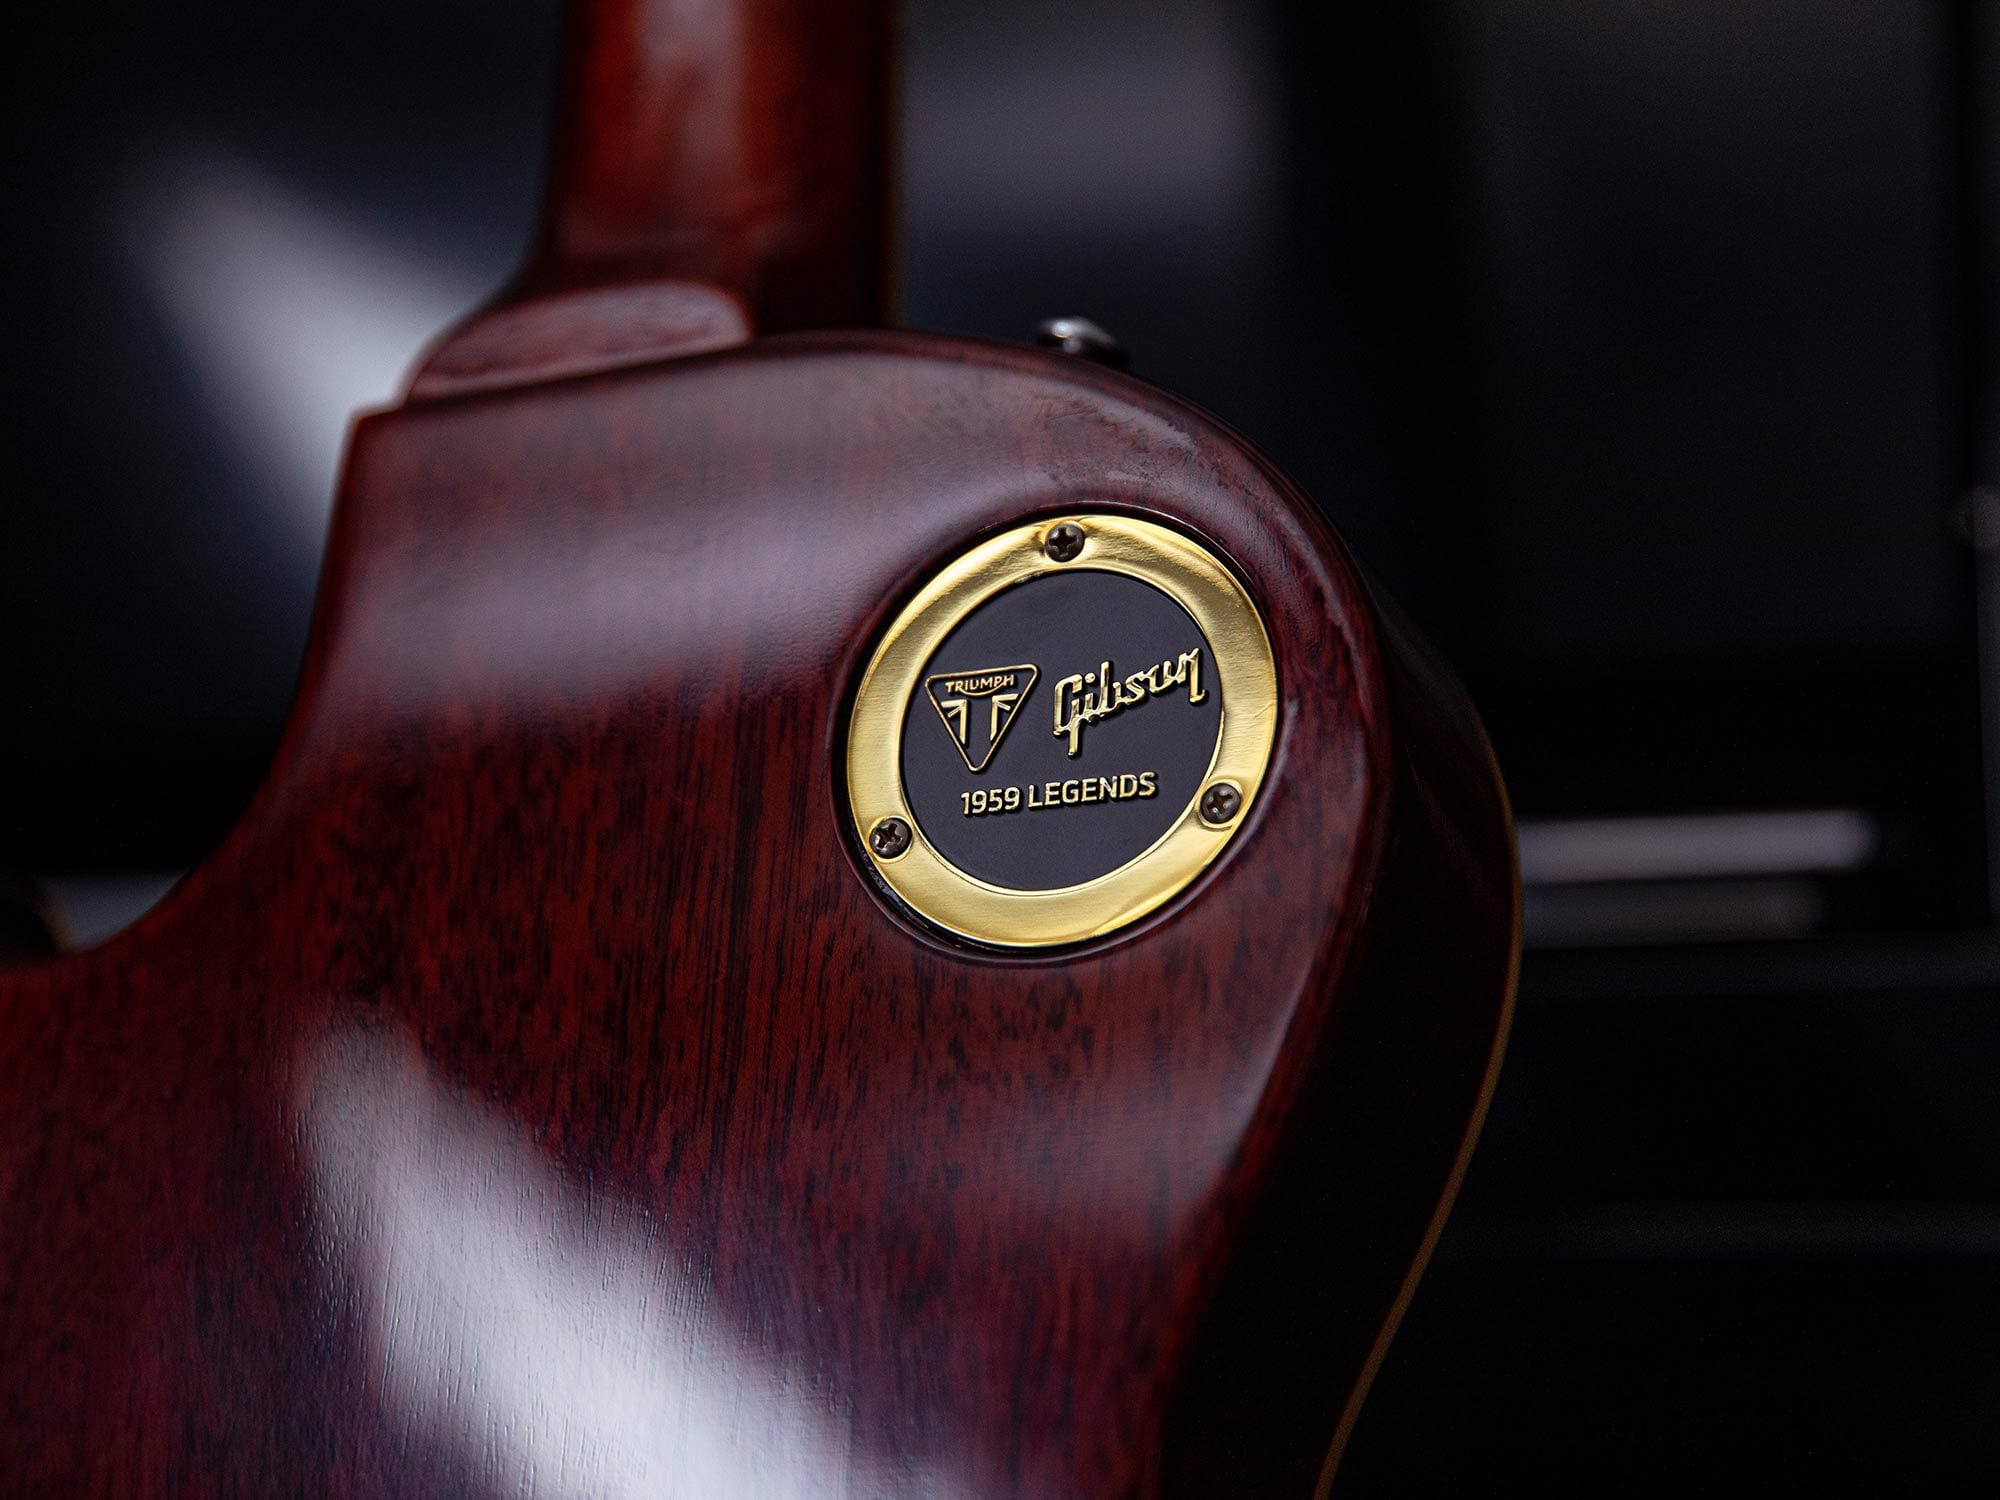 Custom badging further separates the back of this Les Paul apart from all the others.